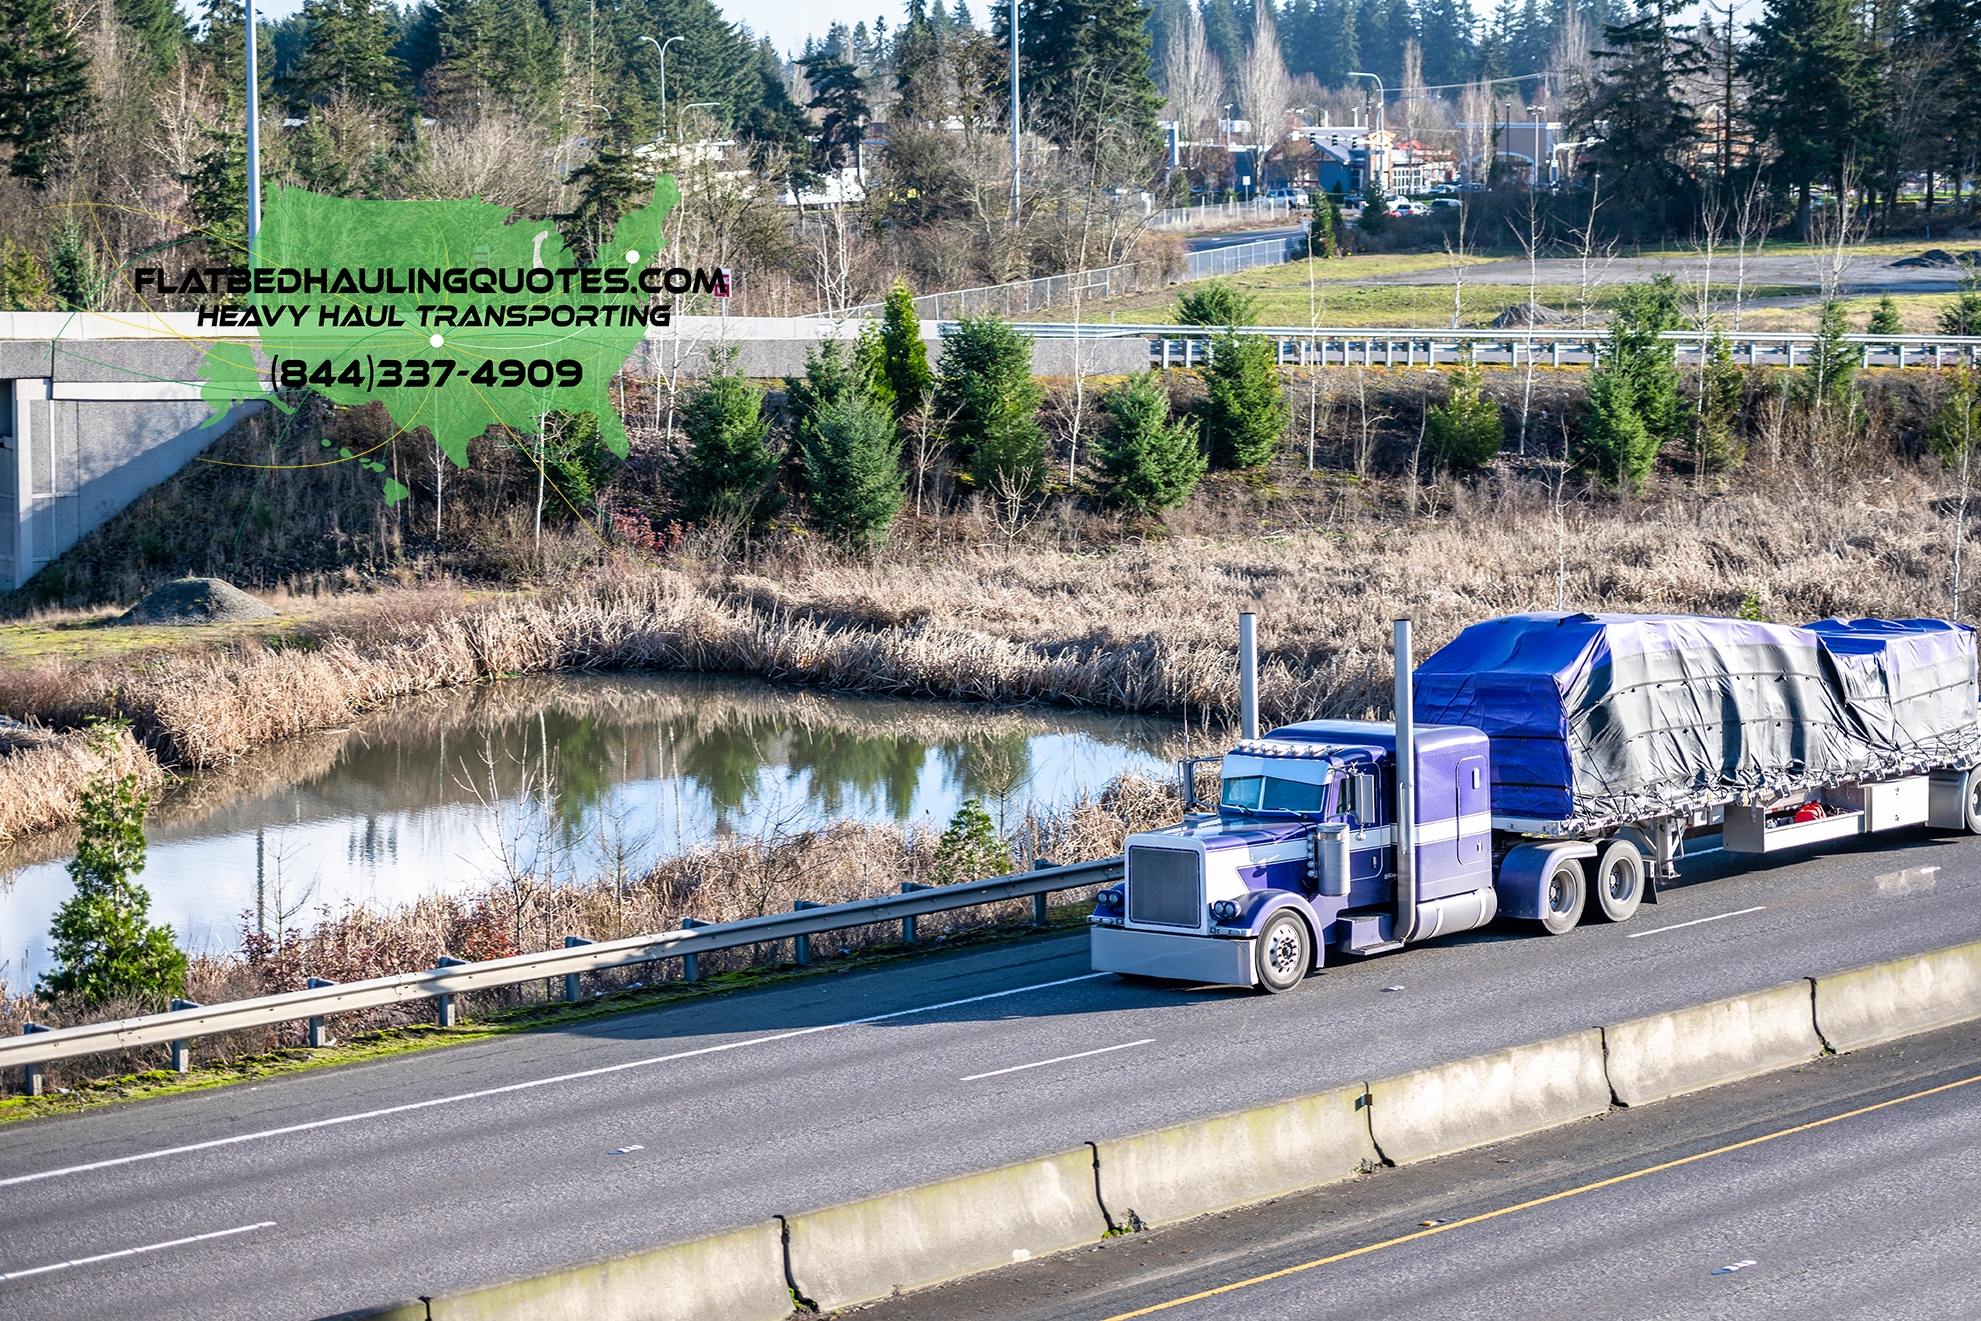 Flatbed Shipping Near Me, Flatbed Trucking Companies, Flatbed Hauling Companies, Machinery Movers, Heavy Haulers